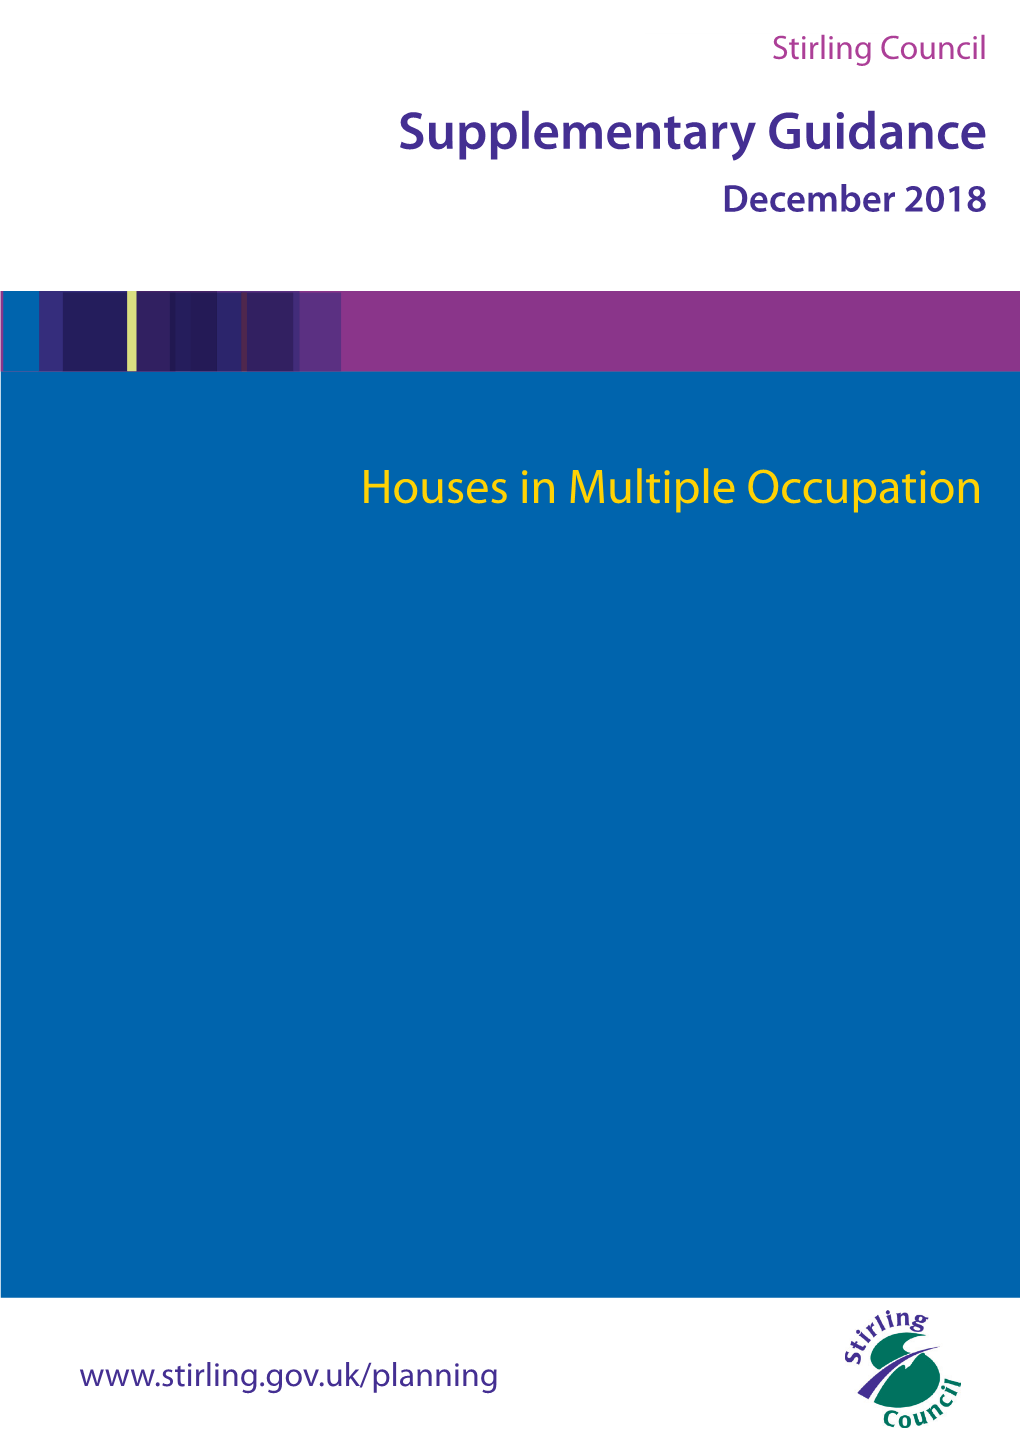 Housing in Multiple Occupation